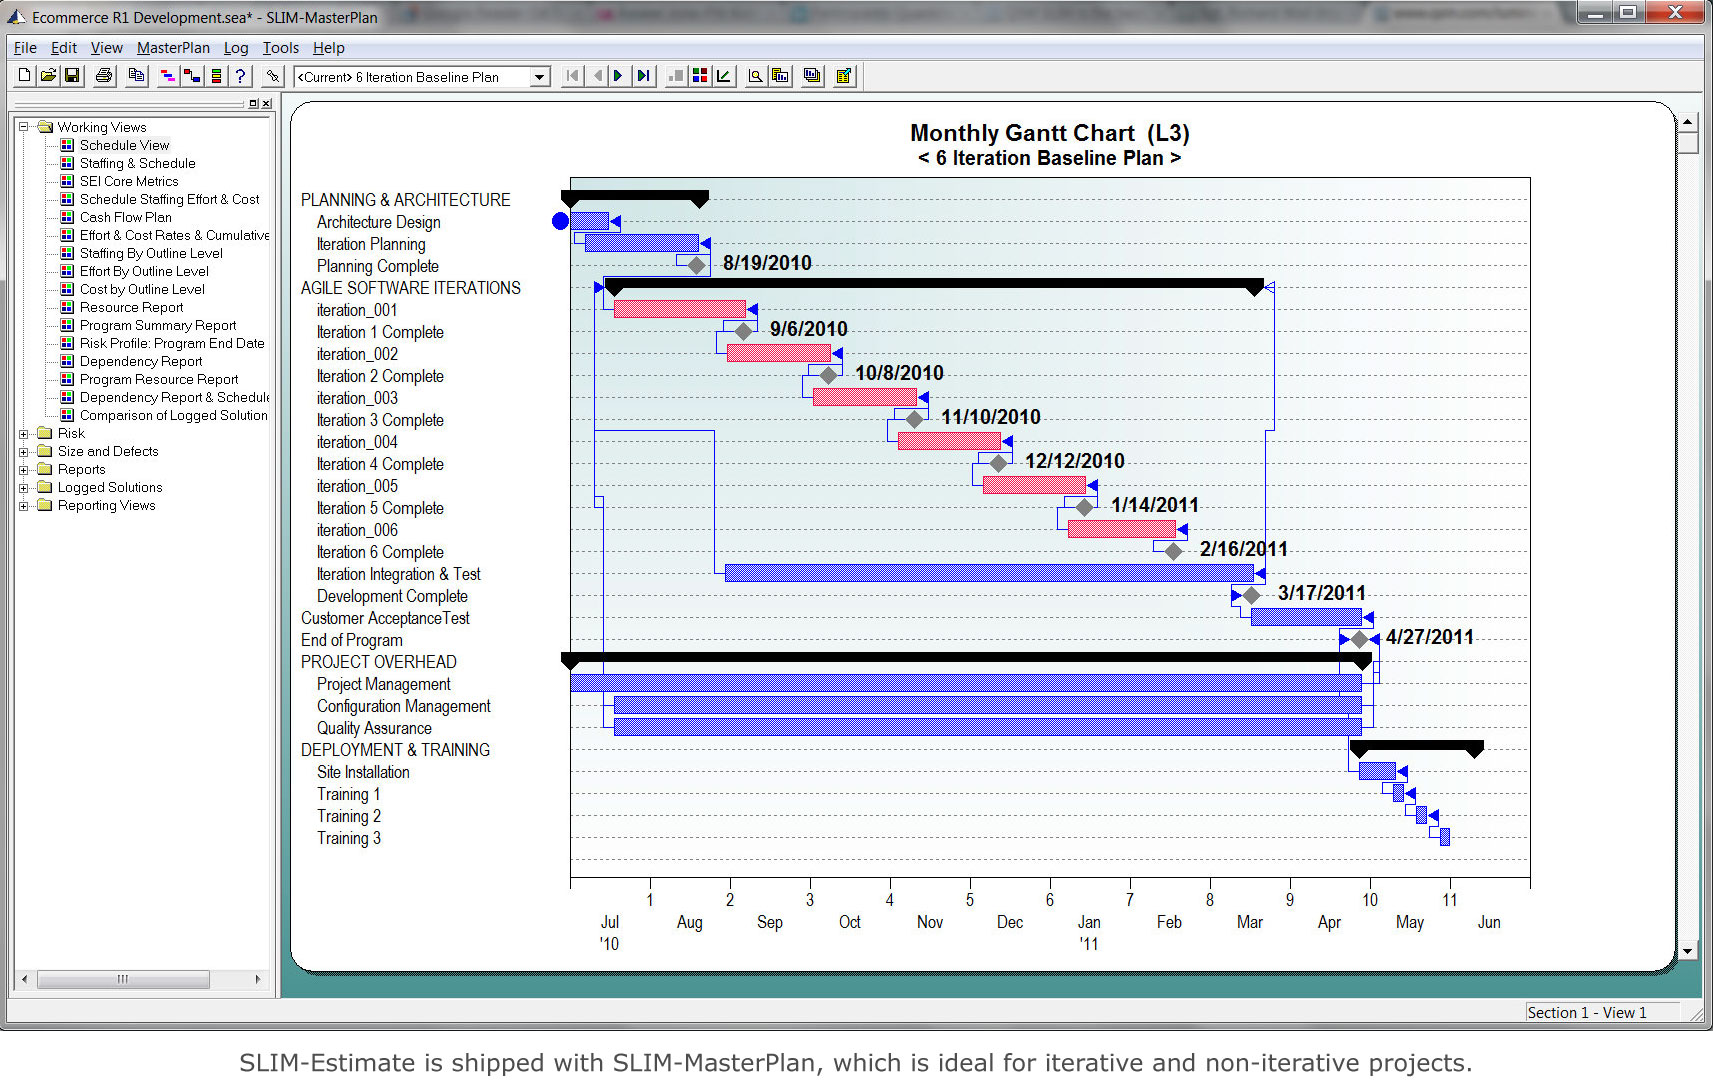 QSM SLIM is the best Software Tool for Project Estimation, Tracking ...